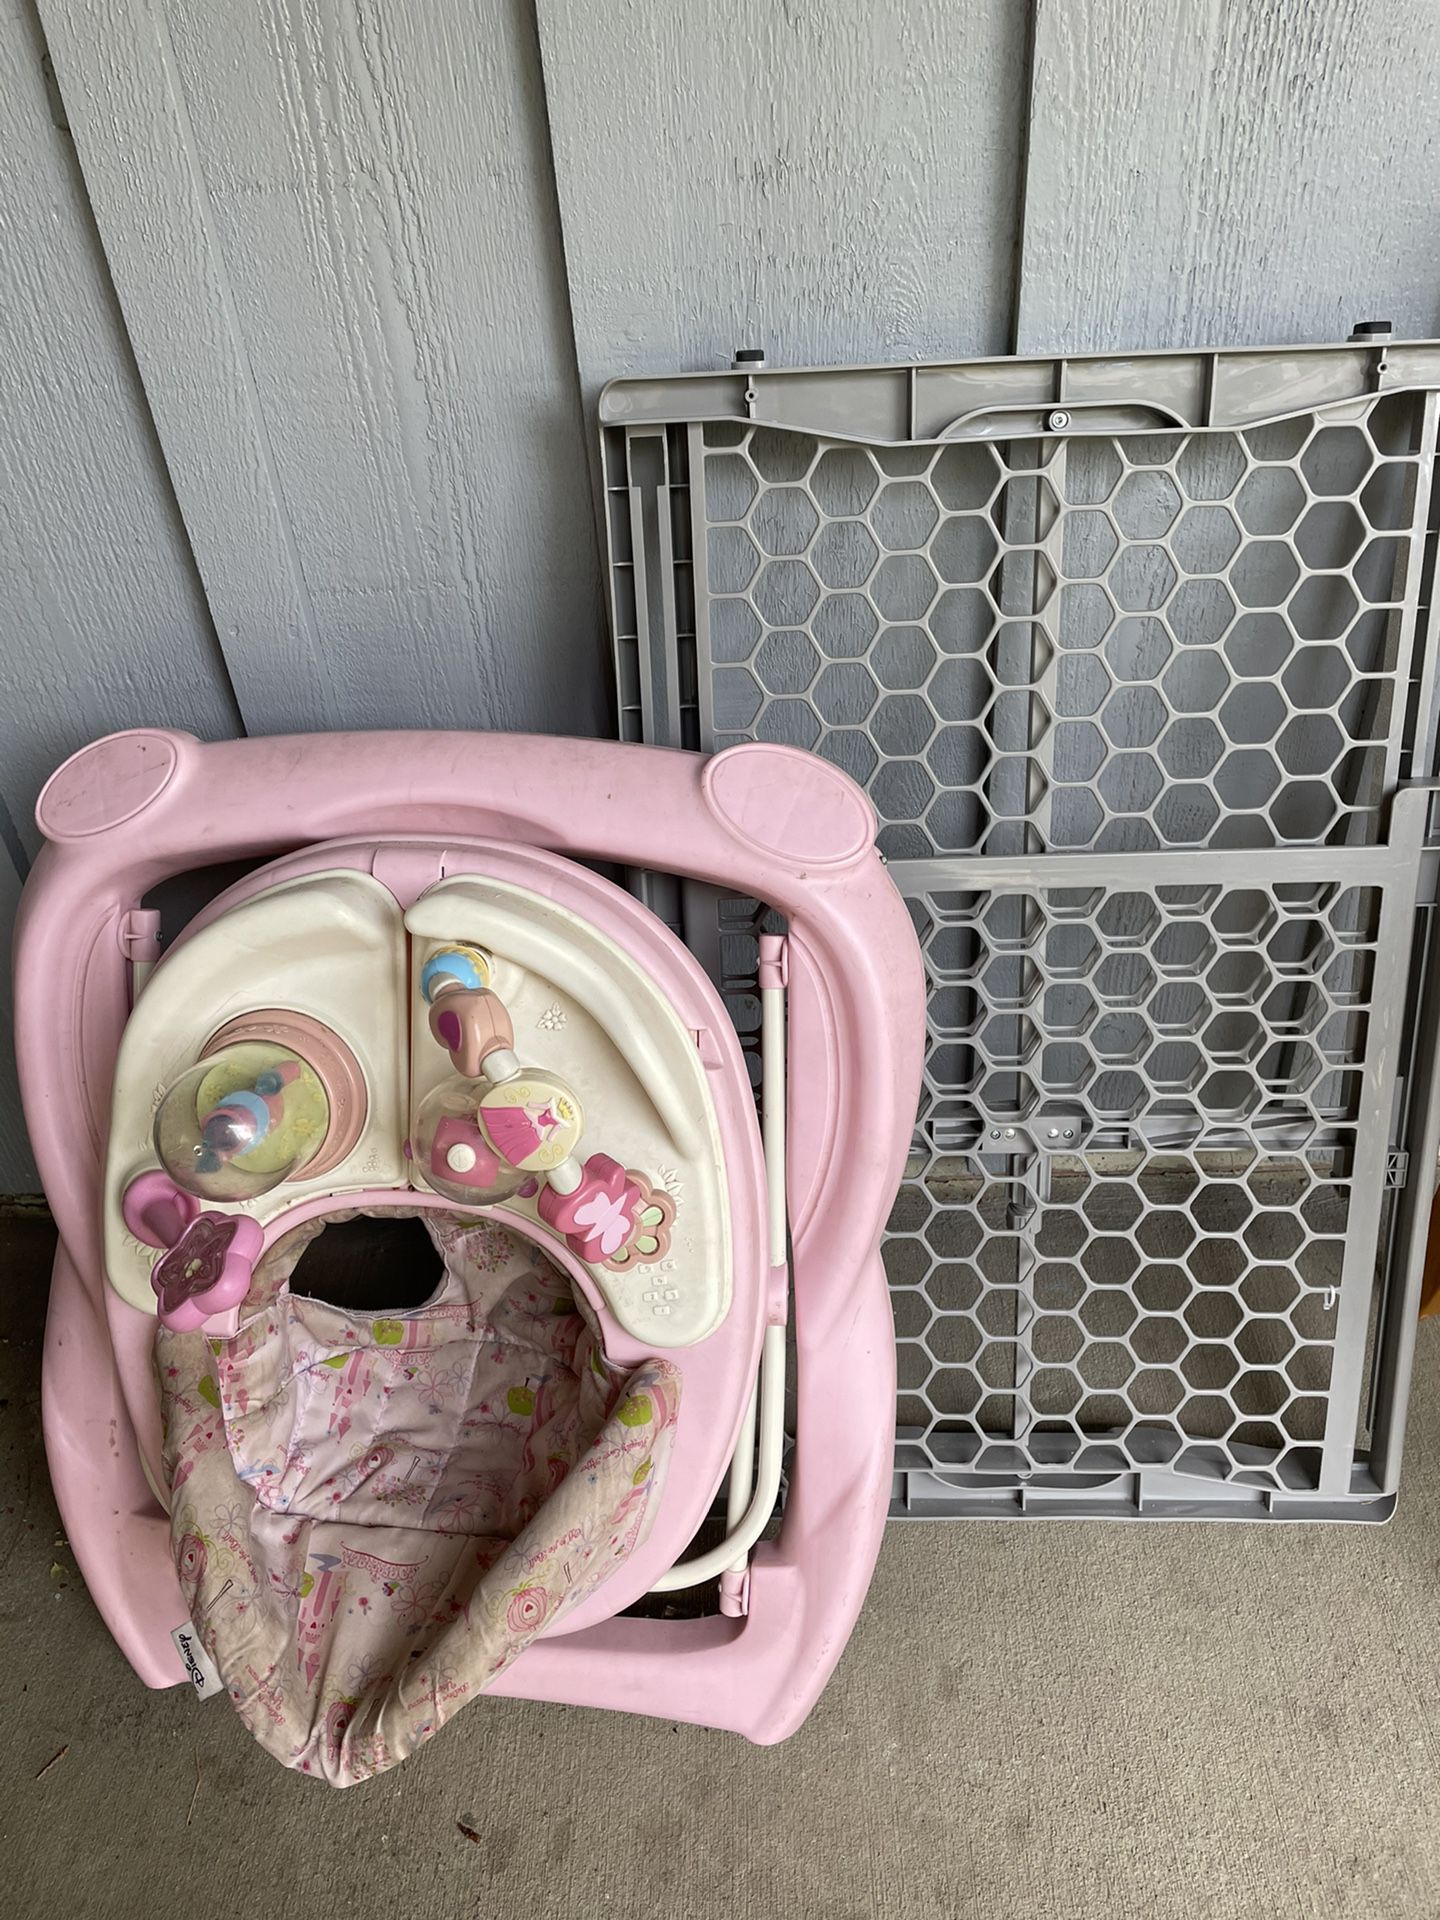 Baby Toy And Baby gate